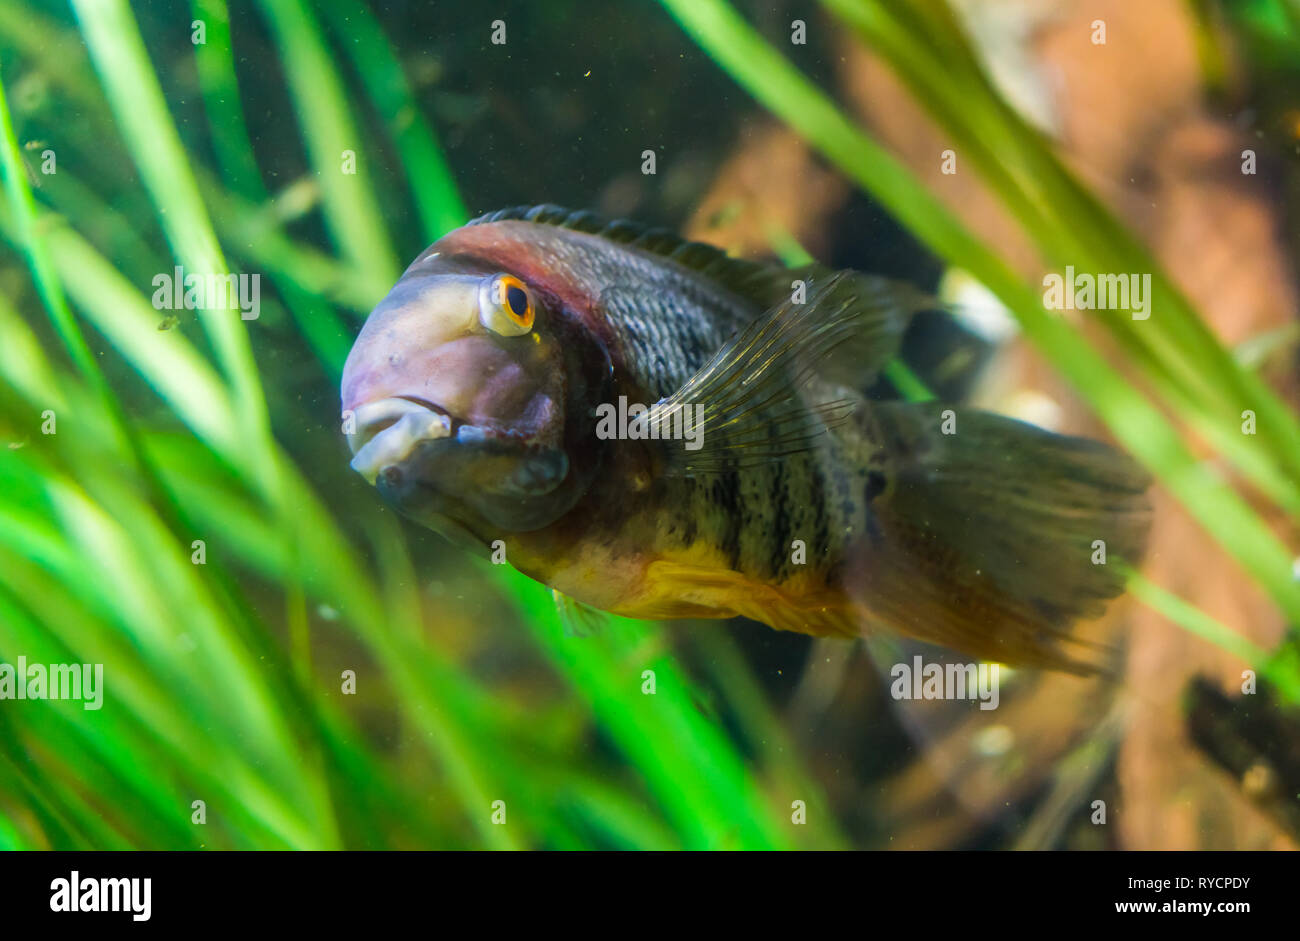 closeup of a banded cichlid, tropical fish from the orinoco river of south America, popular aquarium pet Stock Photo